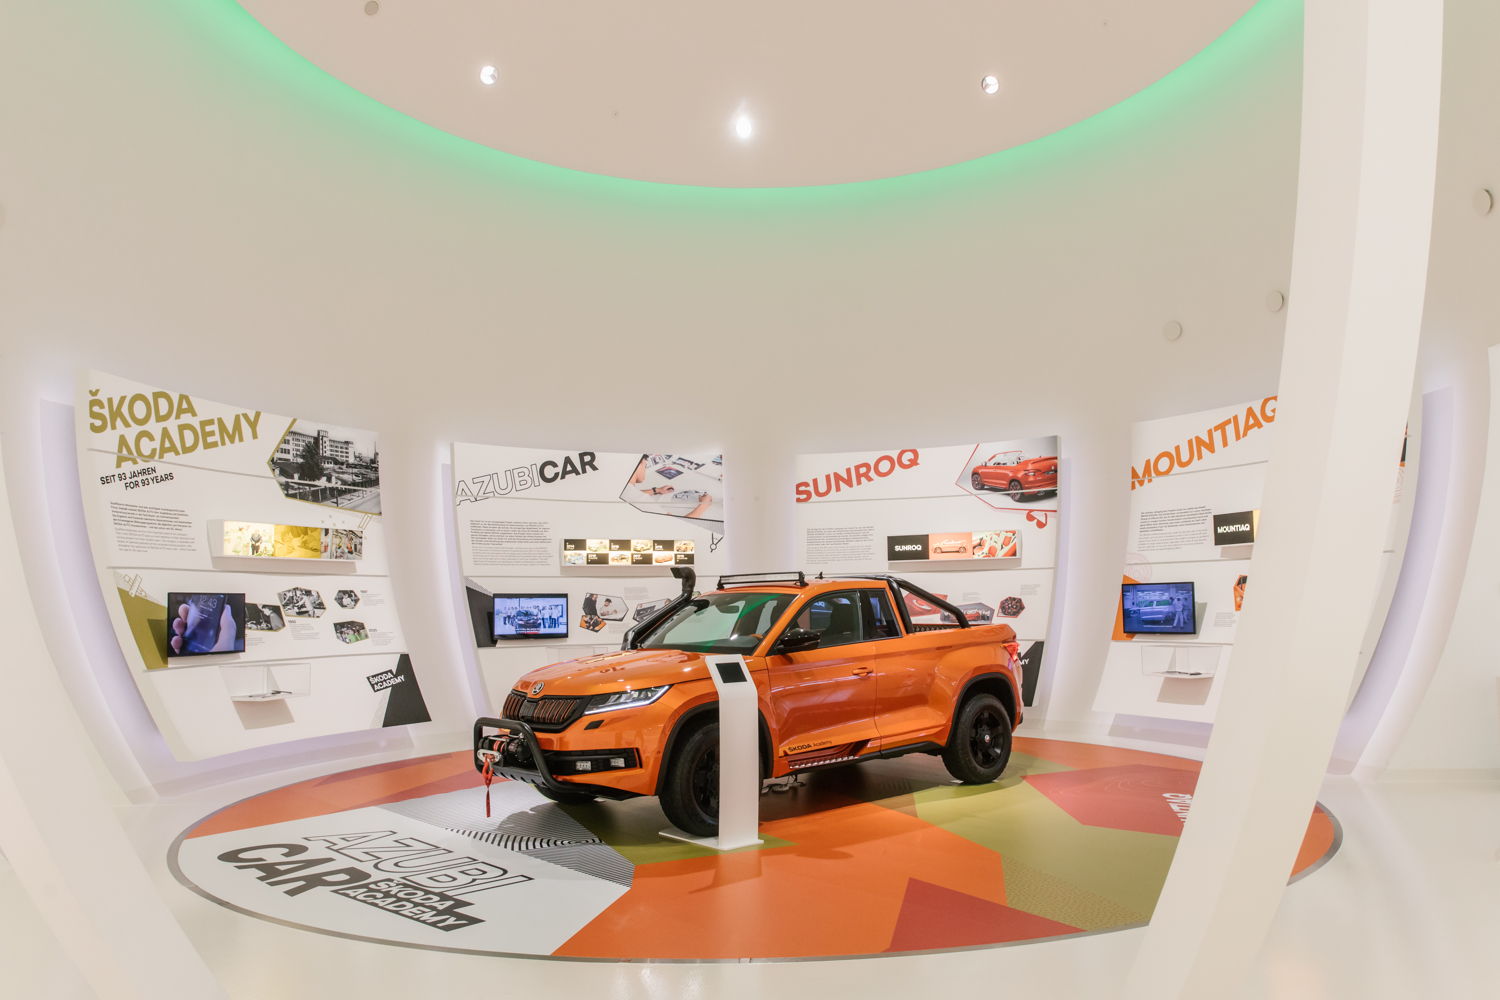 The apprentice cars MOUNTIAQ and SUNROQ were
designed and built by students from the ŠKODA Academy
and demonstrate the high quality of training at the
vocational school in Mladá Boleslav.